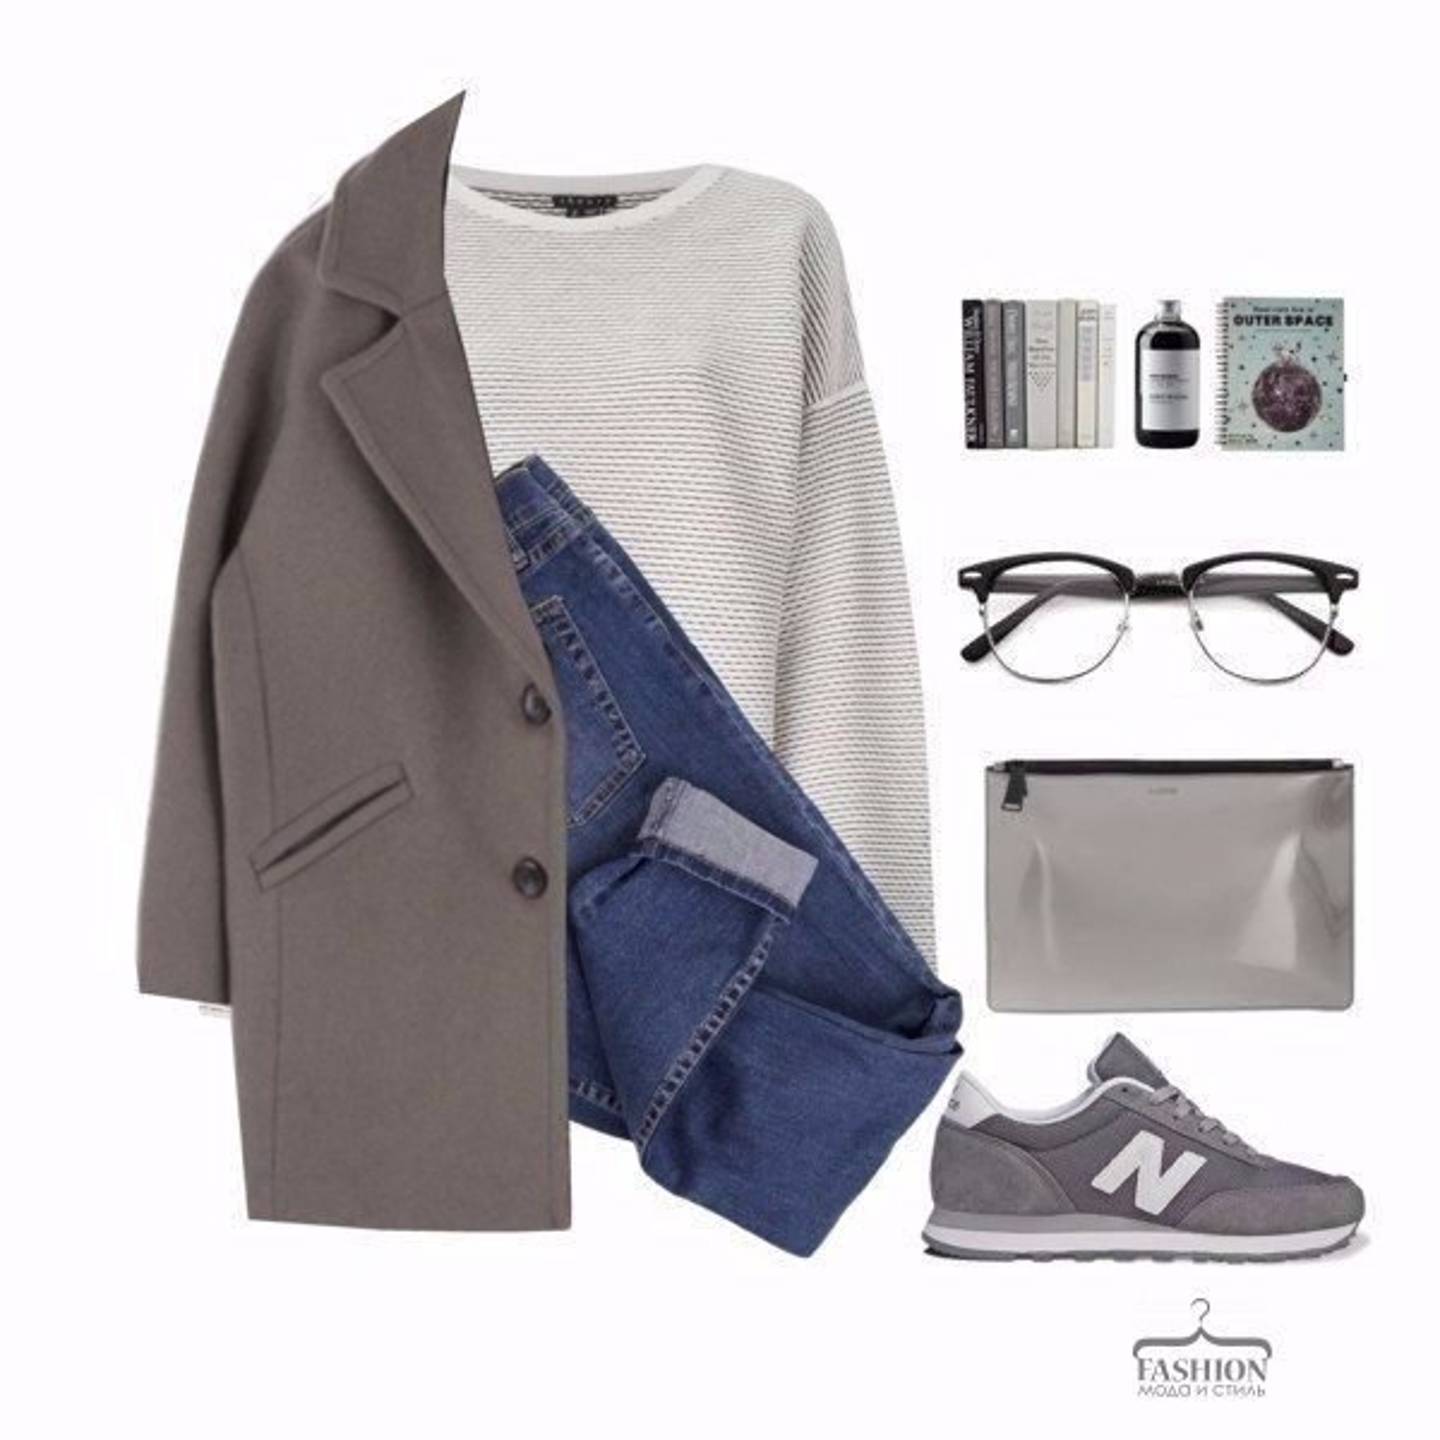 Fashion - Sport Outfit